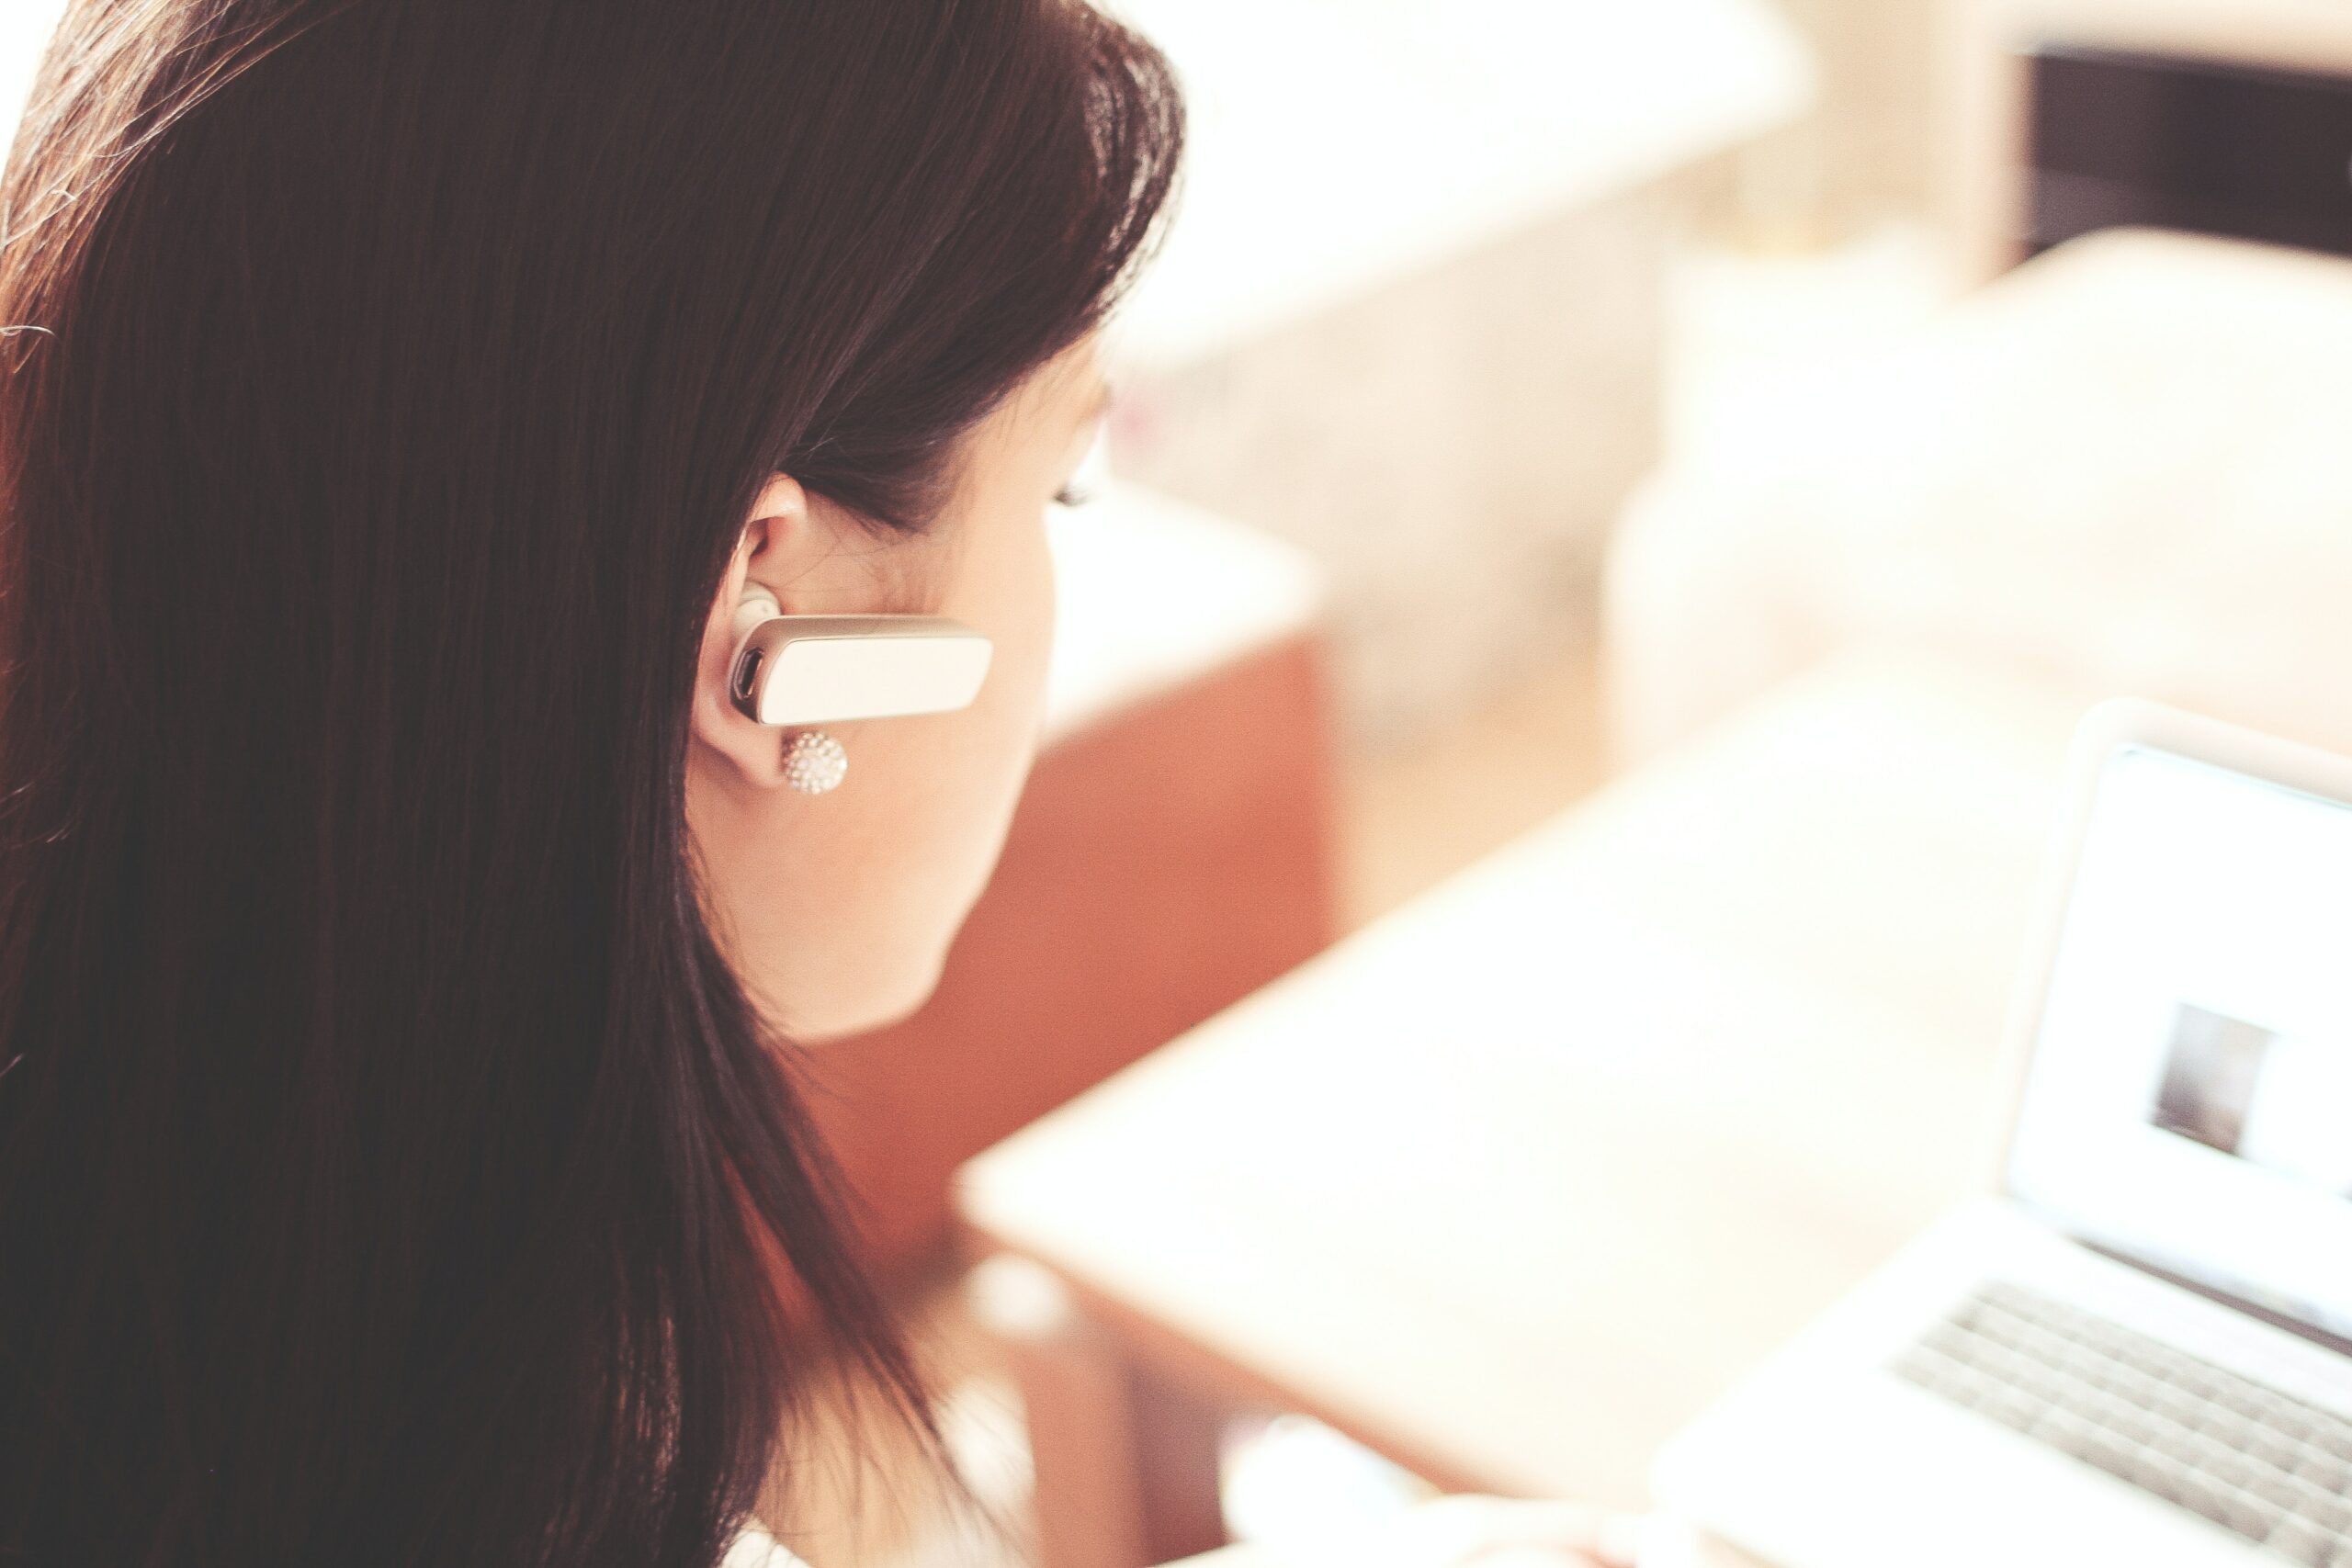 What impact does a telephone answering service have on your business?